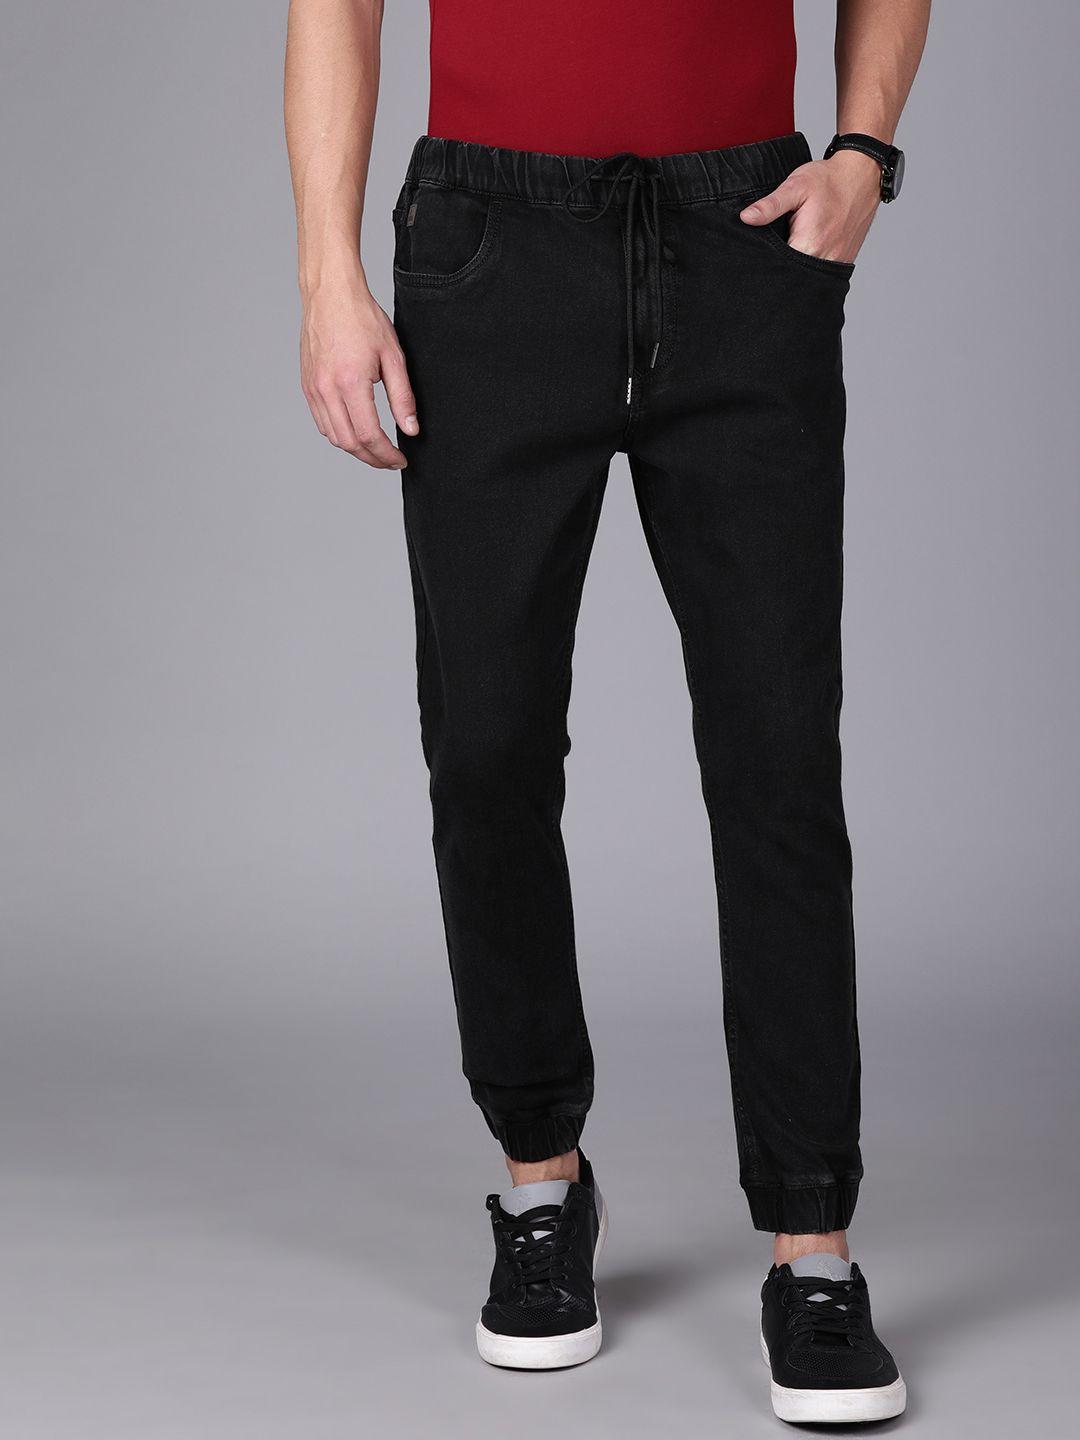 wrogn men black jogger fit mid-rise clean look stretchable jeans